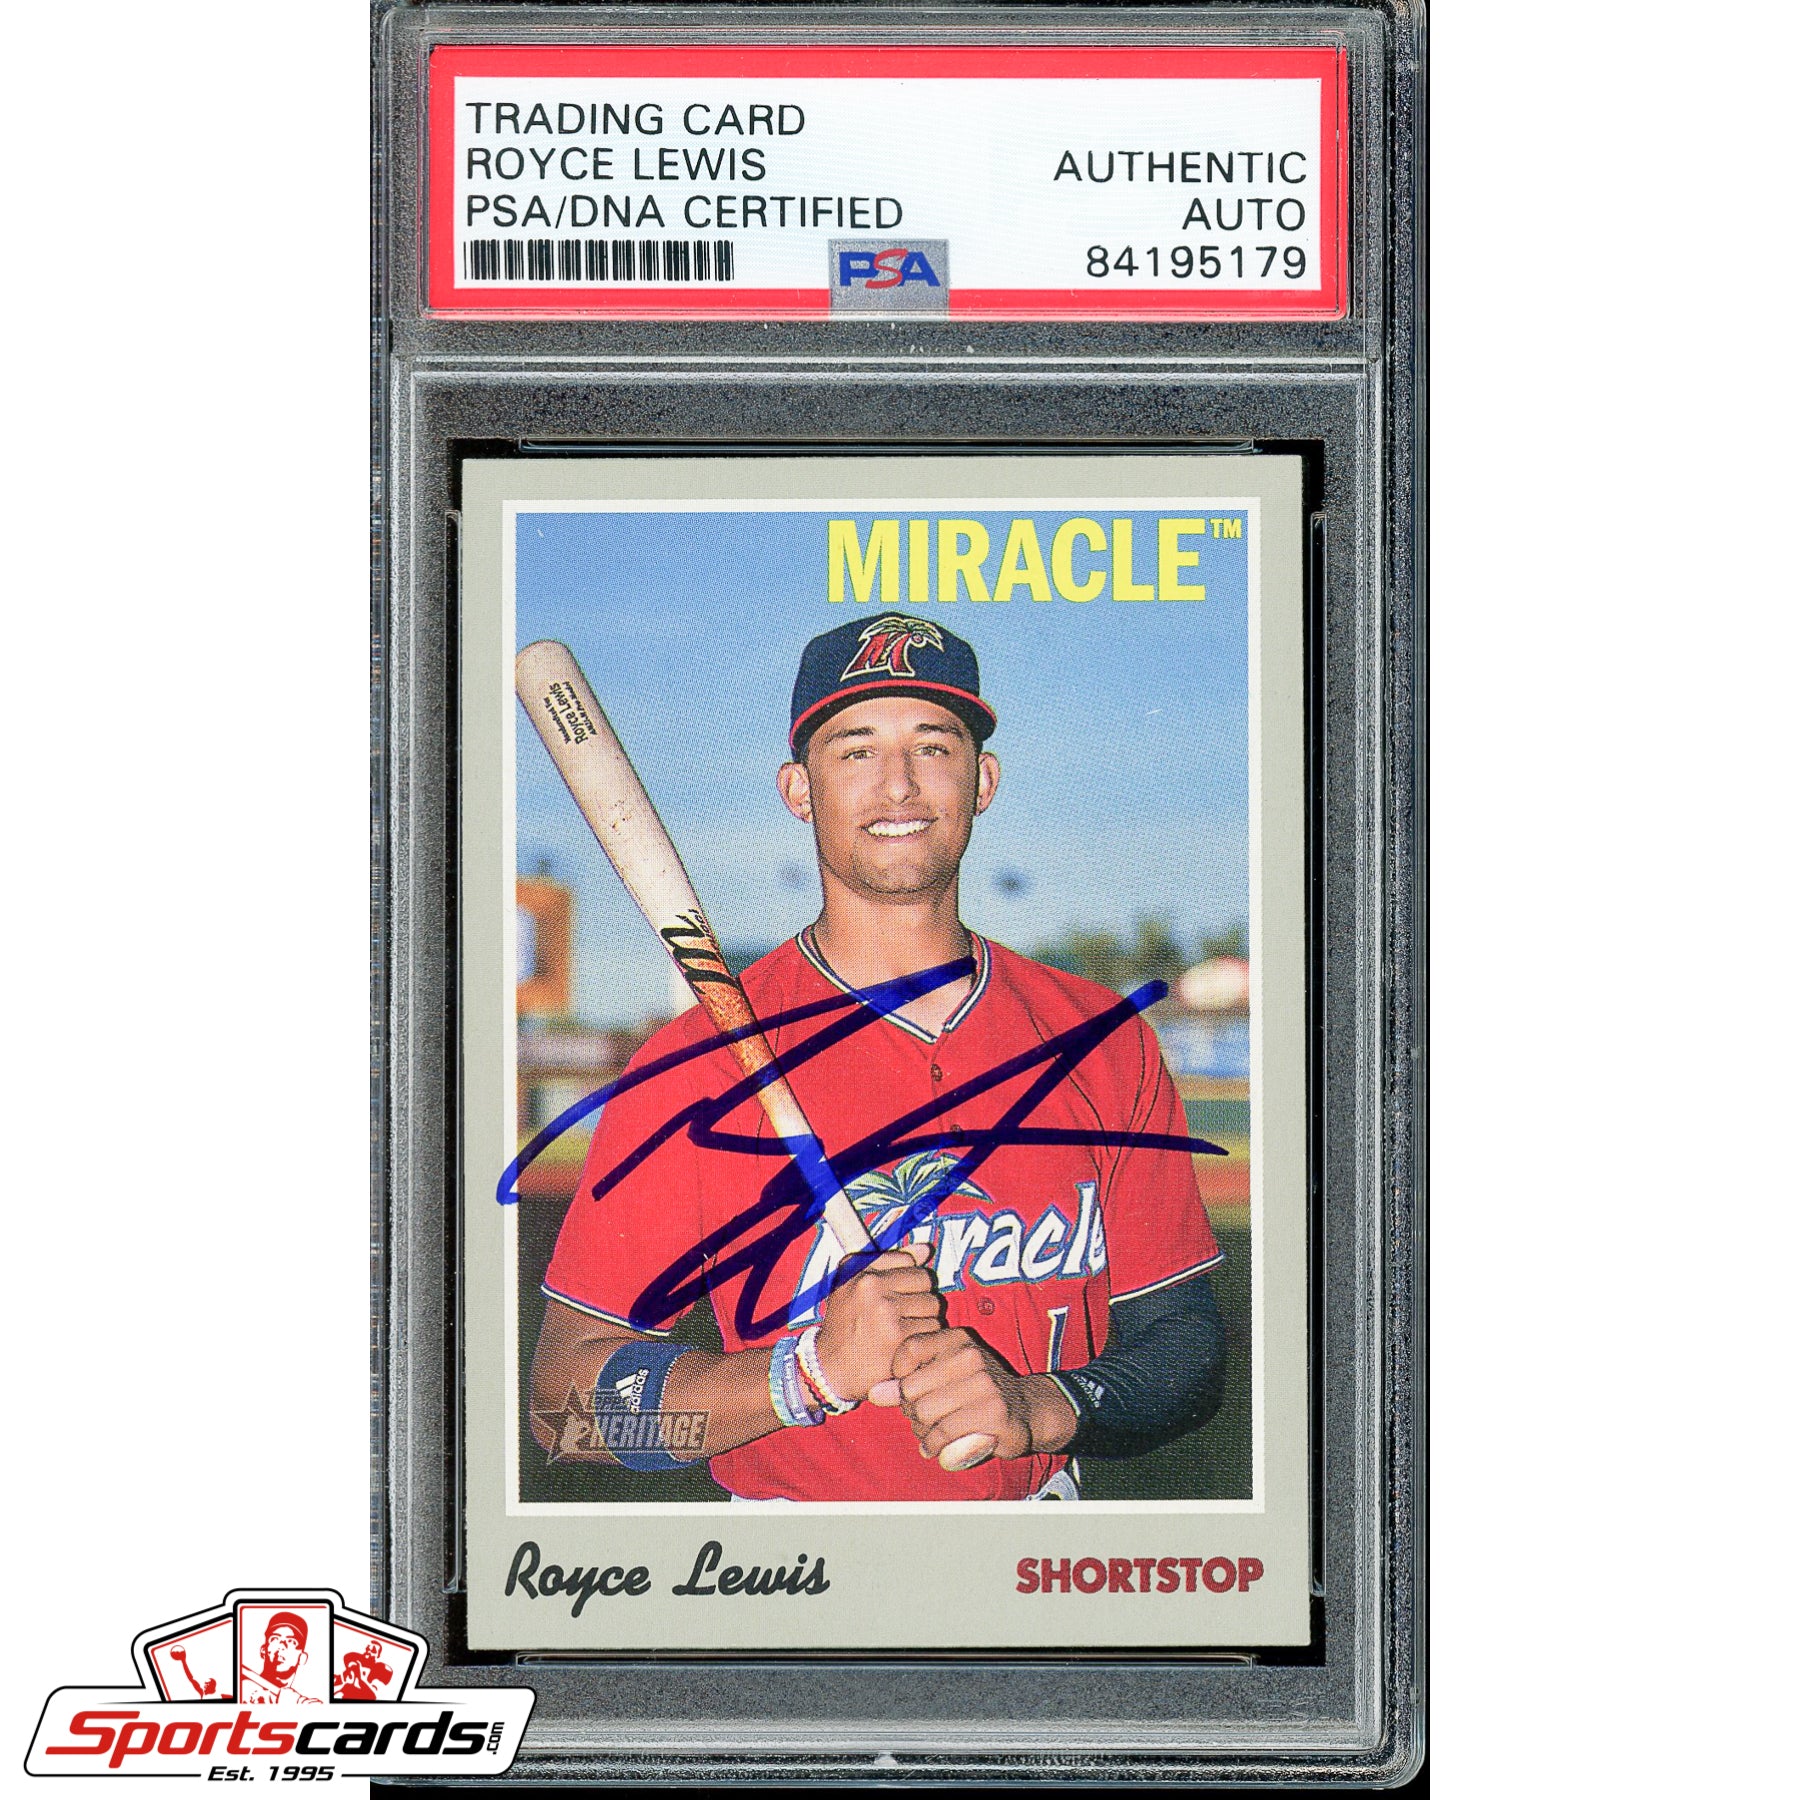 Royce Lewis Signed Autographed 2019 Topps Heritage Card PSA/DNA #100